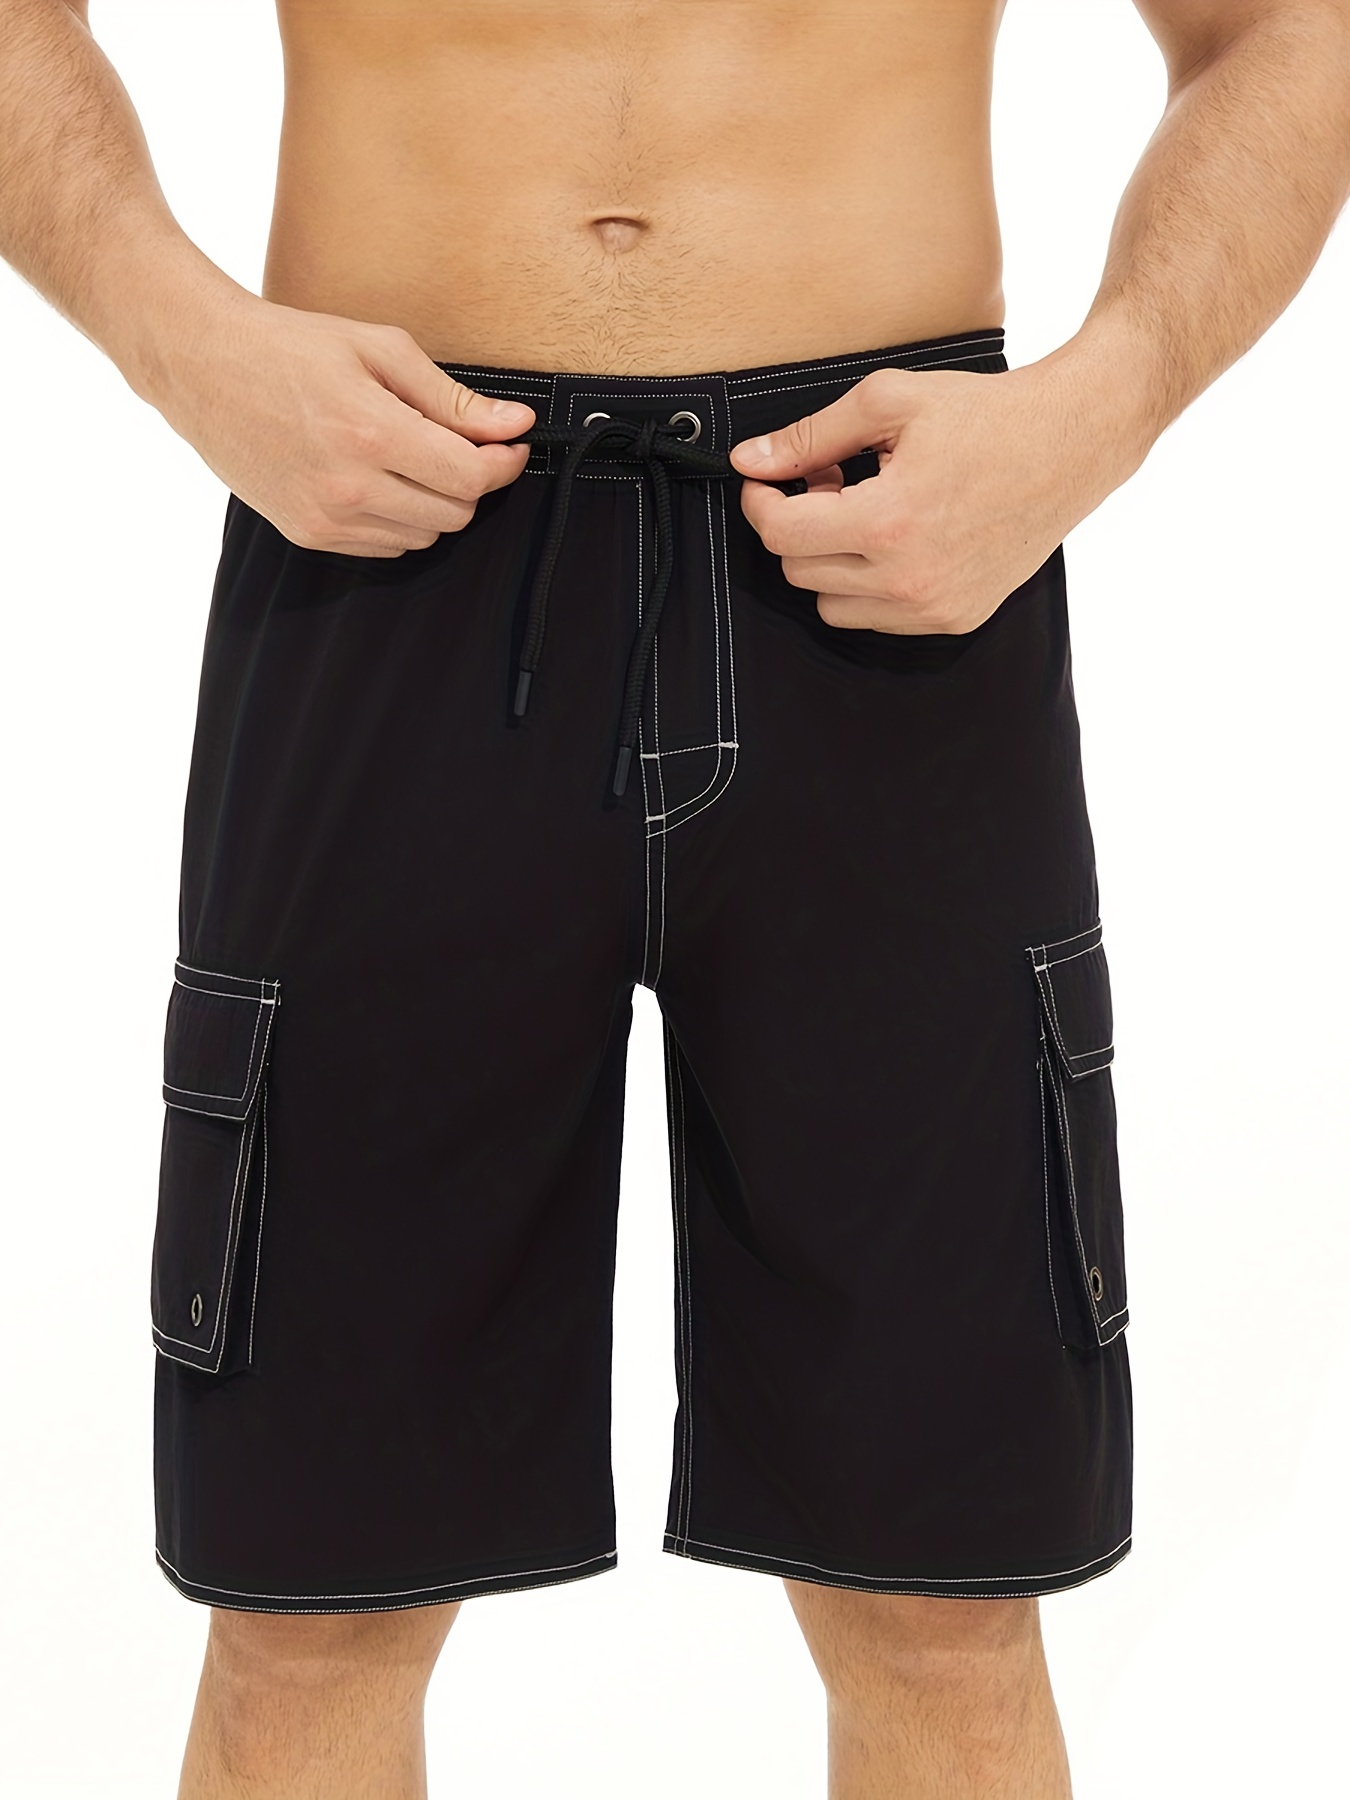 Designer Striped Beach Shorts For Men For Men And Women Quick Drying,  Perfect For Summer Swim, Casual Sports, Gym, And Beach Black A333E From  Zazvf, $30